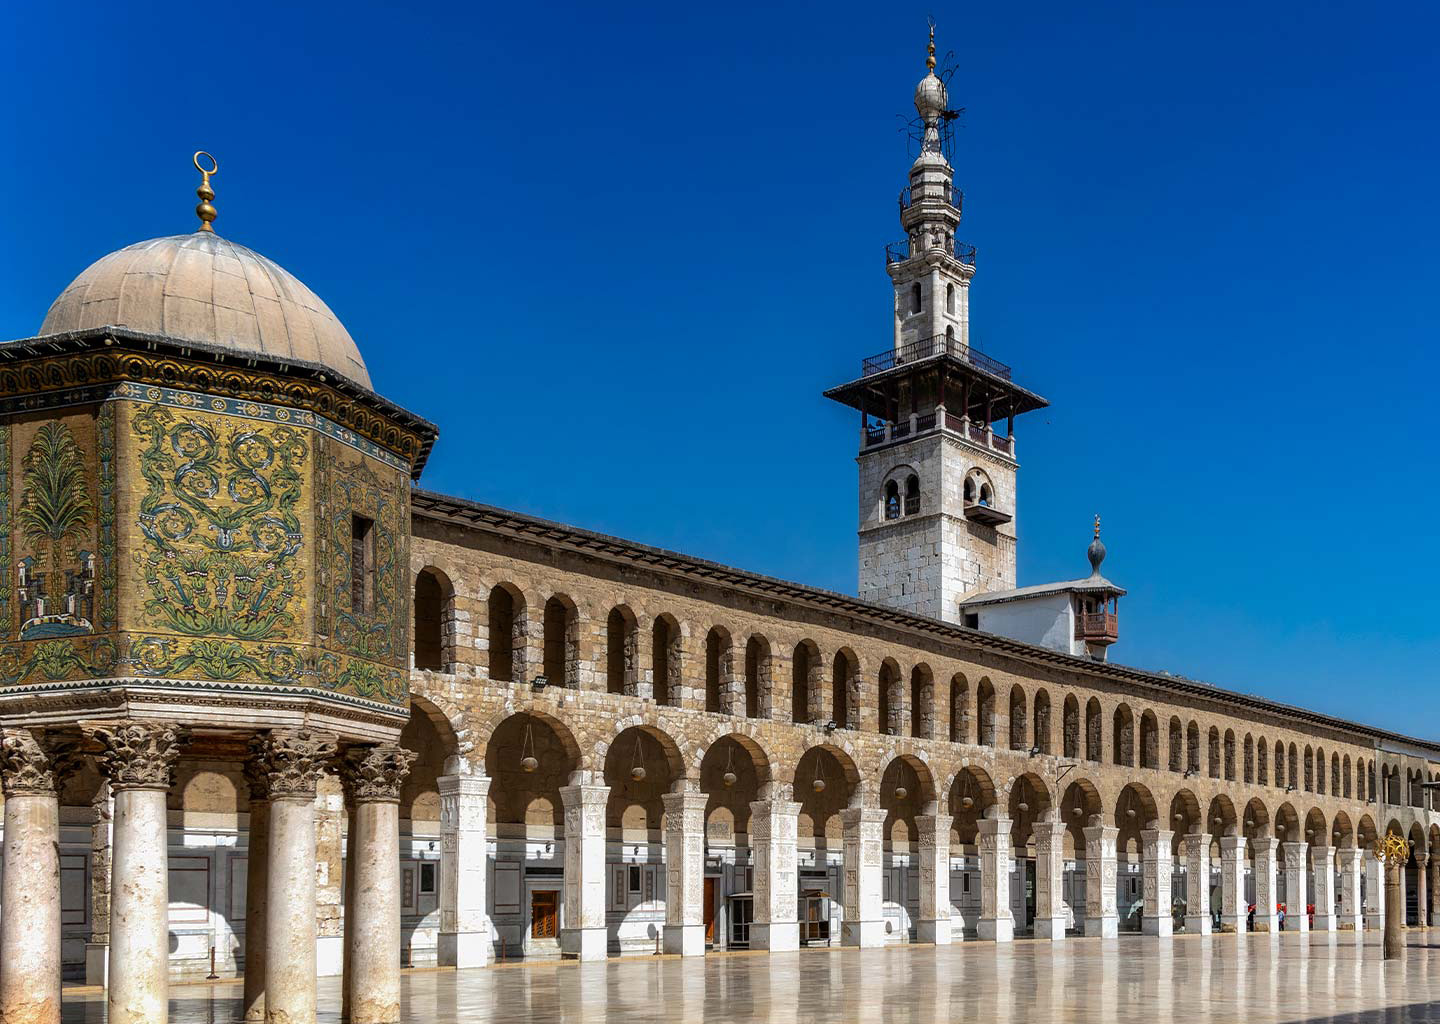 In the photograph, the main courtyard of the iconic Umayyad Mosque of Damascus takes center stage, while an exquisite minaret graces the background, creating a captivating scene.